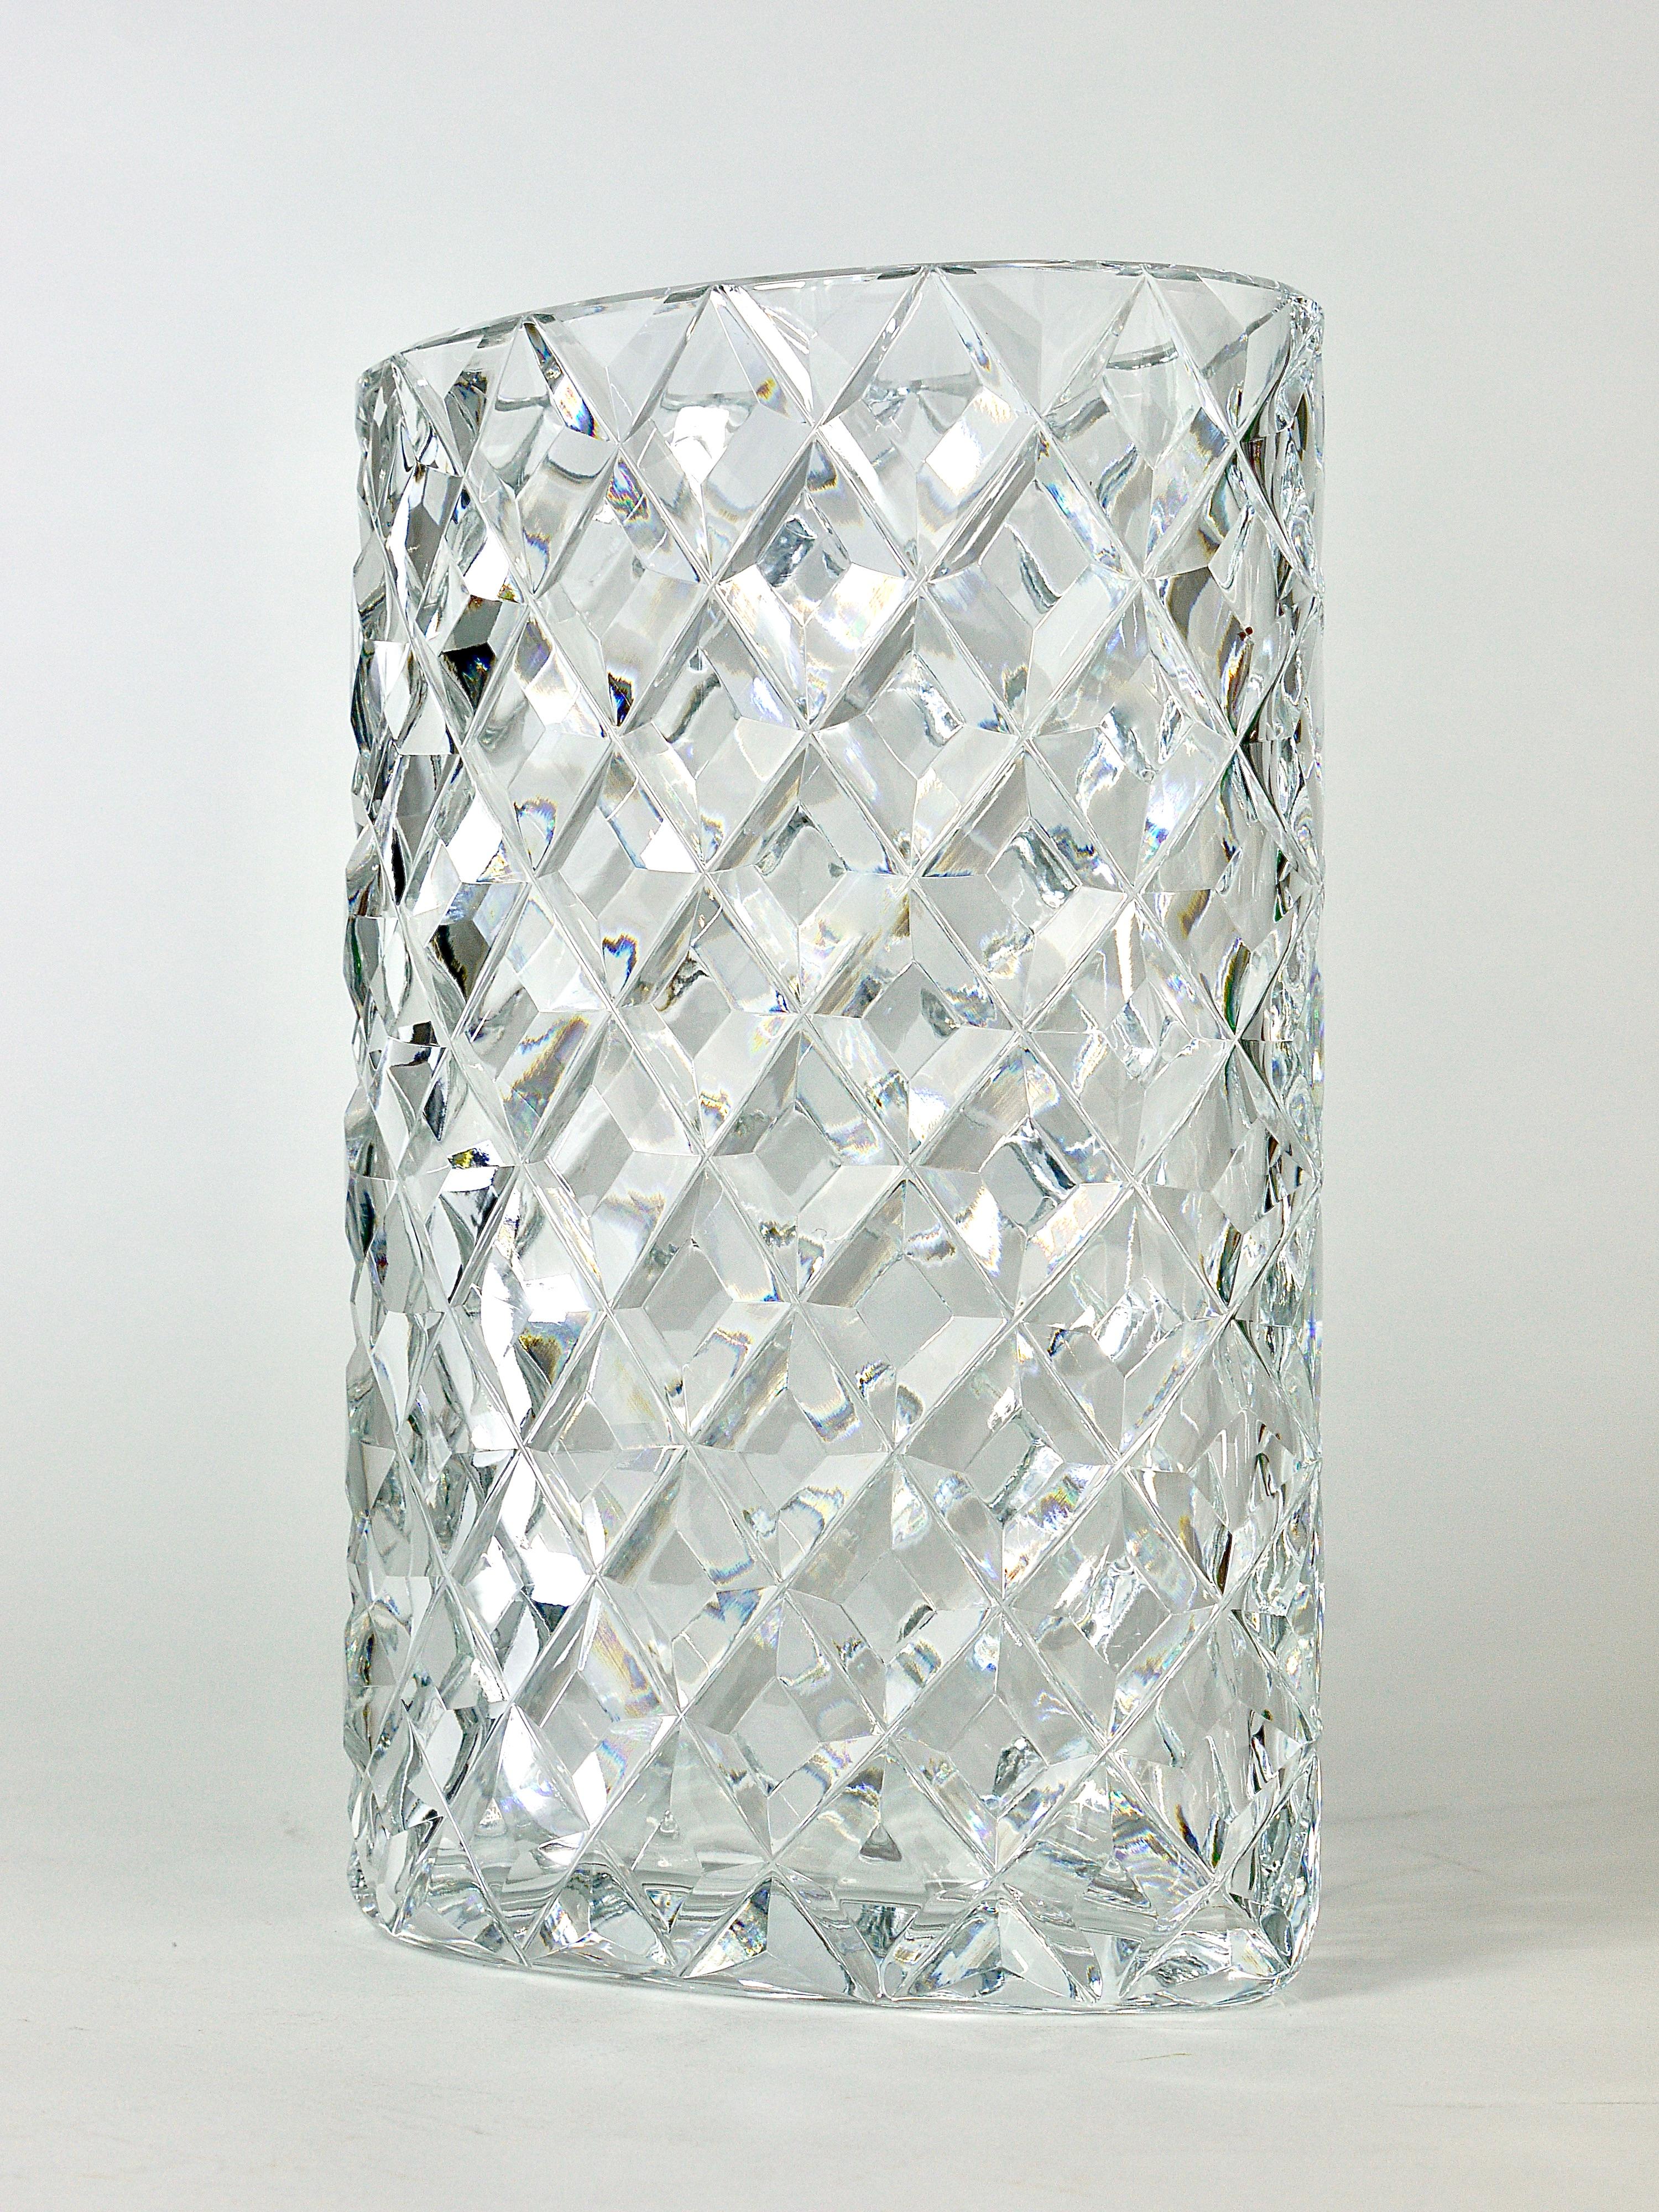 Late 20th Century Sparkling Facetted Crystal Glass Vase by Claus Josef Riedel, Austria, 1970s For Sale